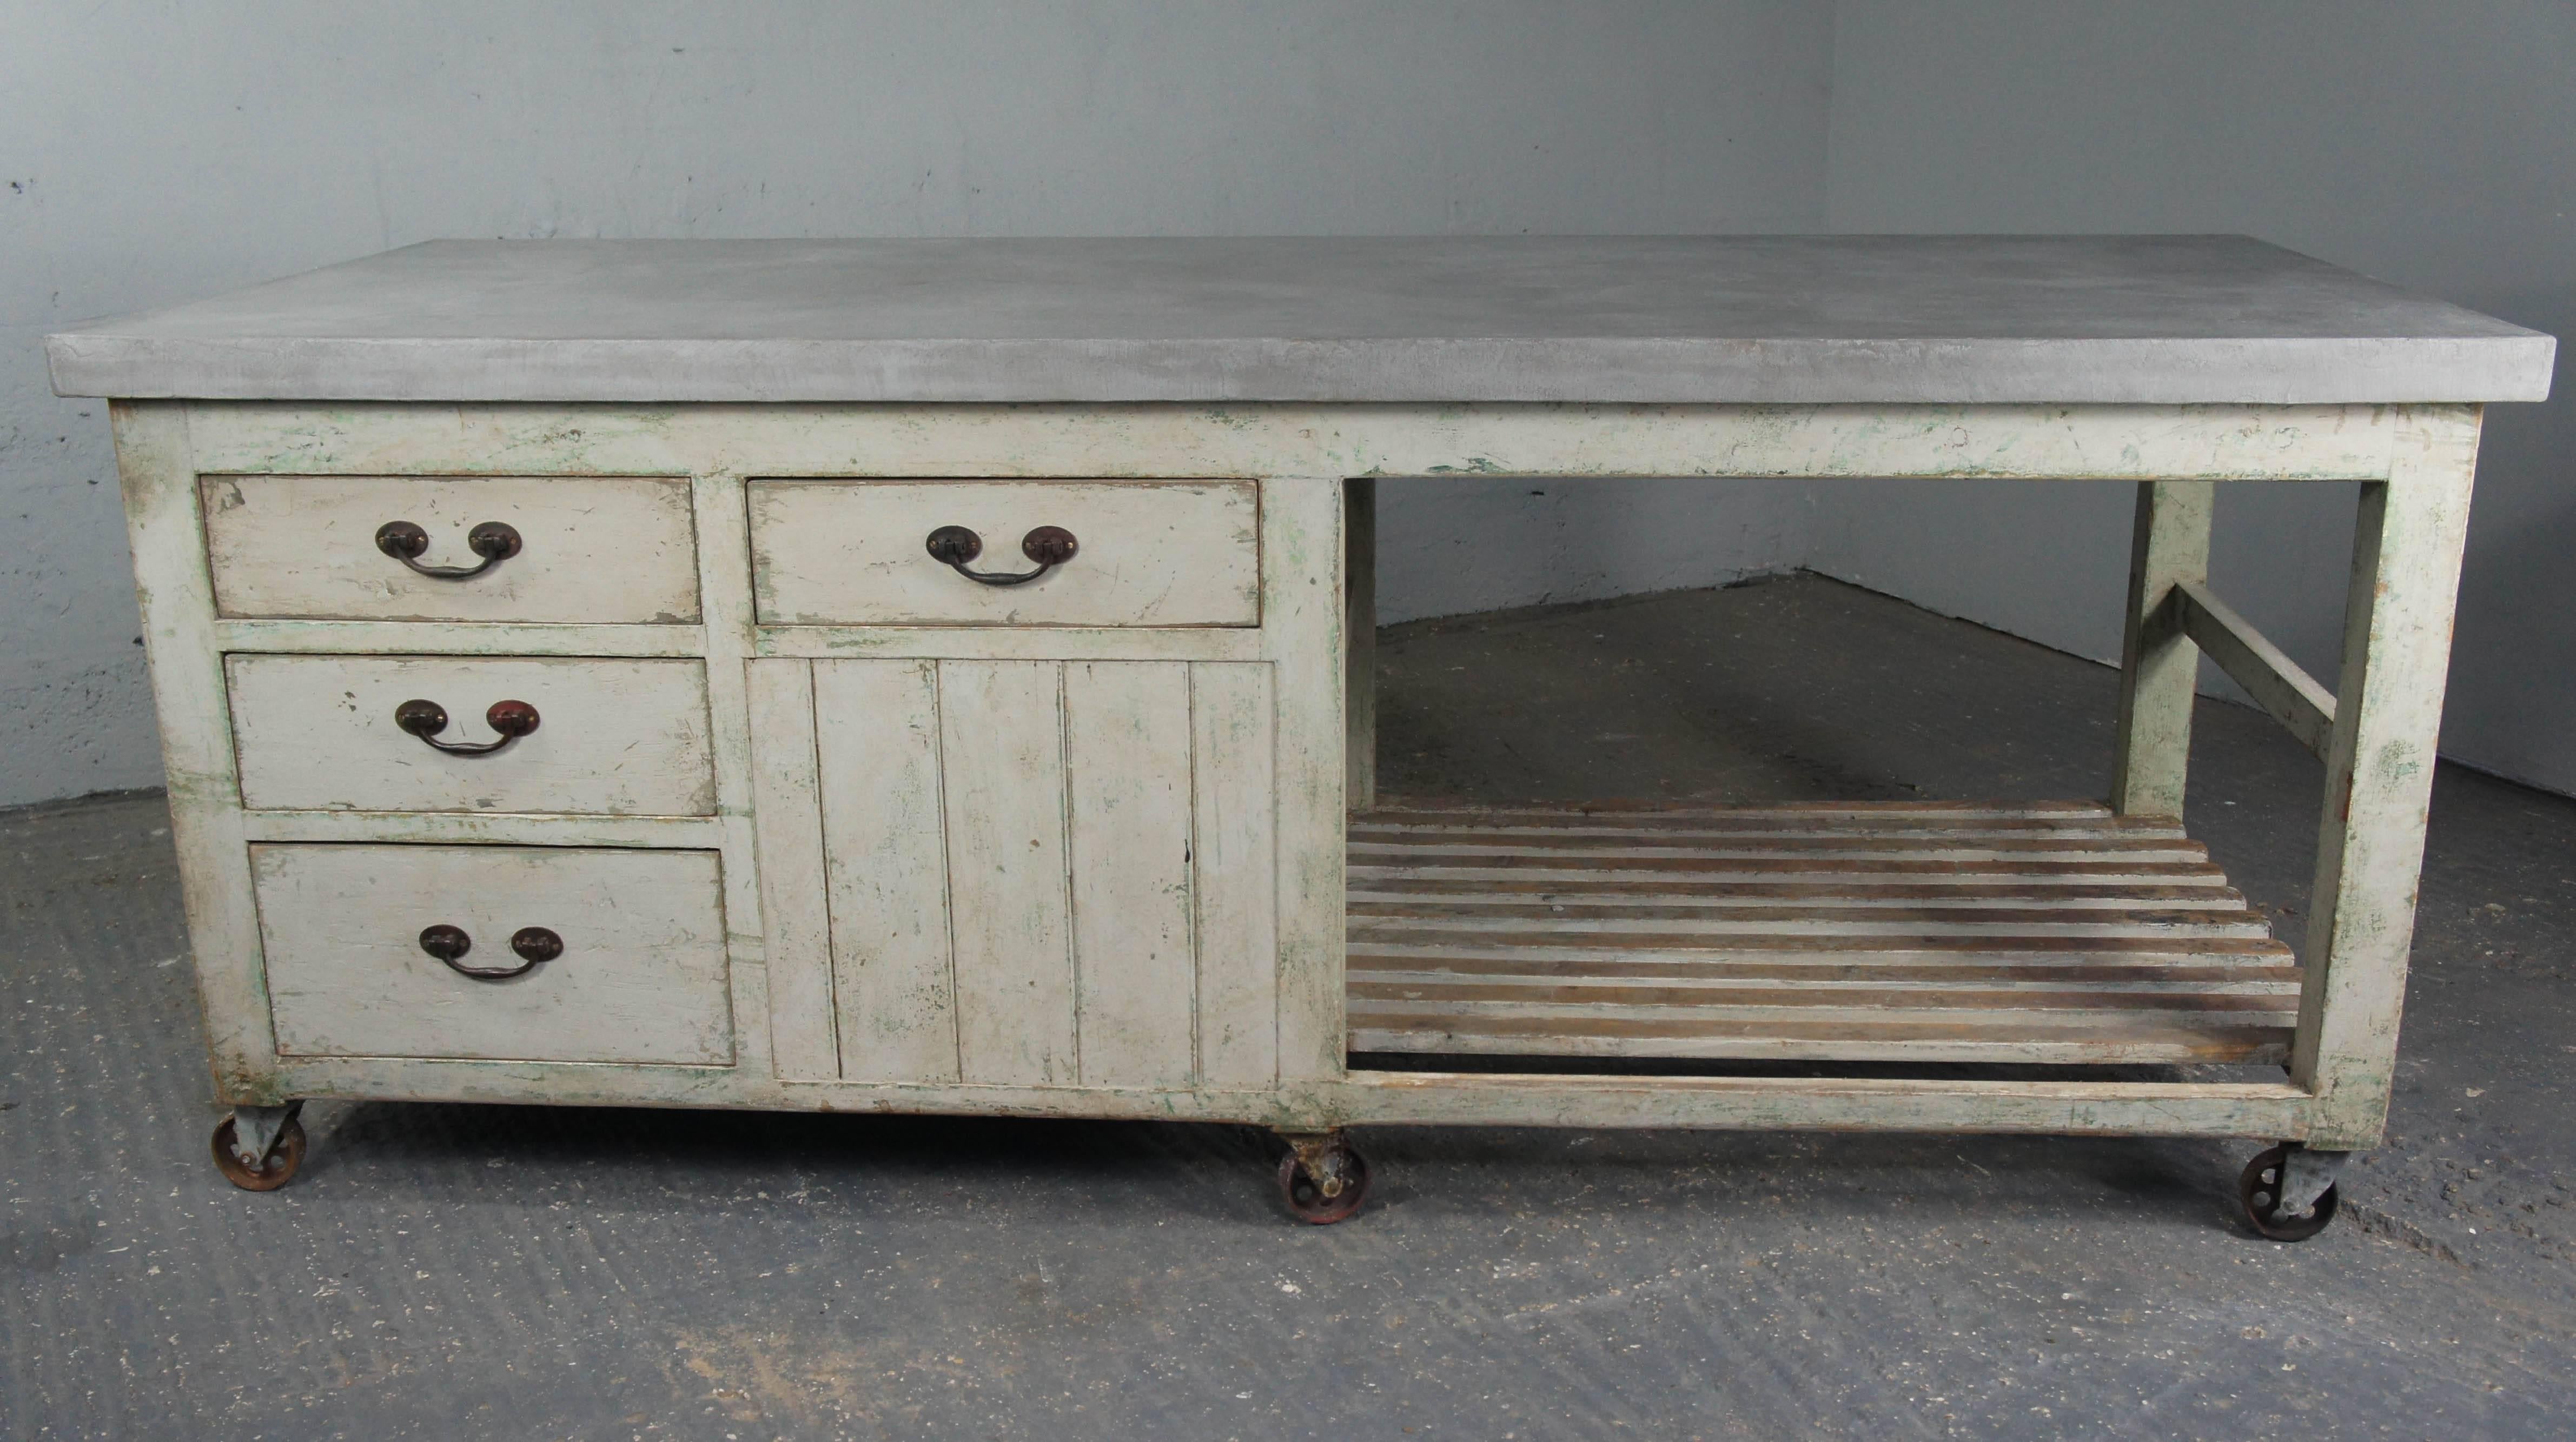 Fantastic Industrial pine workbench with modern cement resin top. Cement resin is extremely durable and practical for use in a kitchen. Later pale grey paint with hints of green showing through where the top layer of paint has worn away. There are